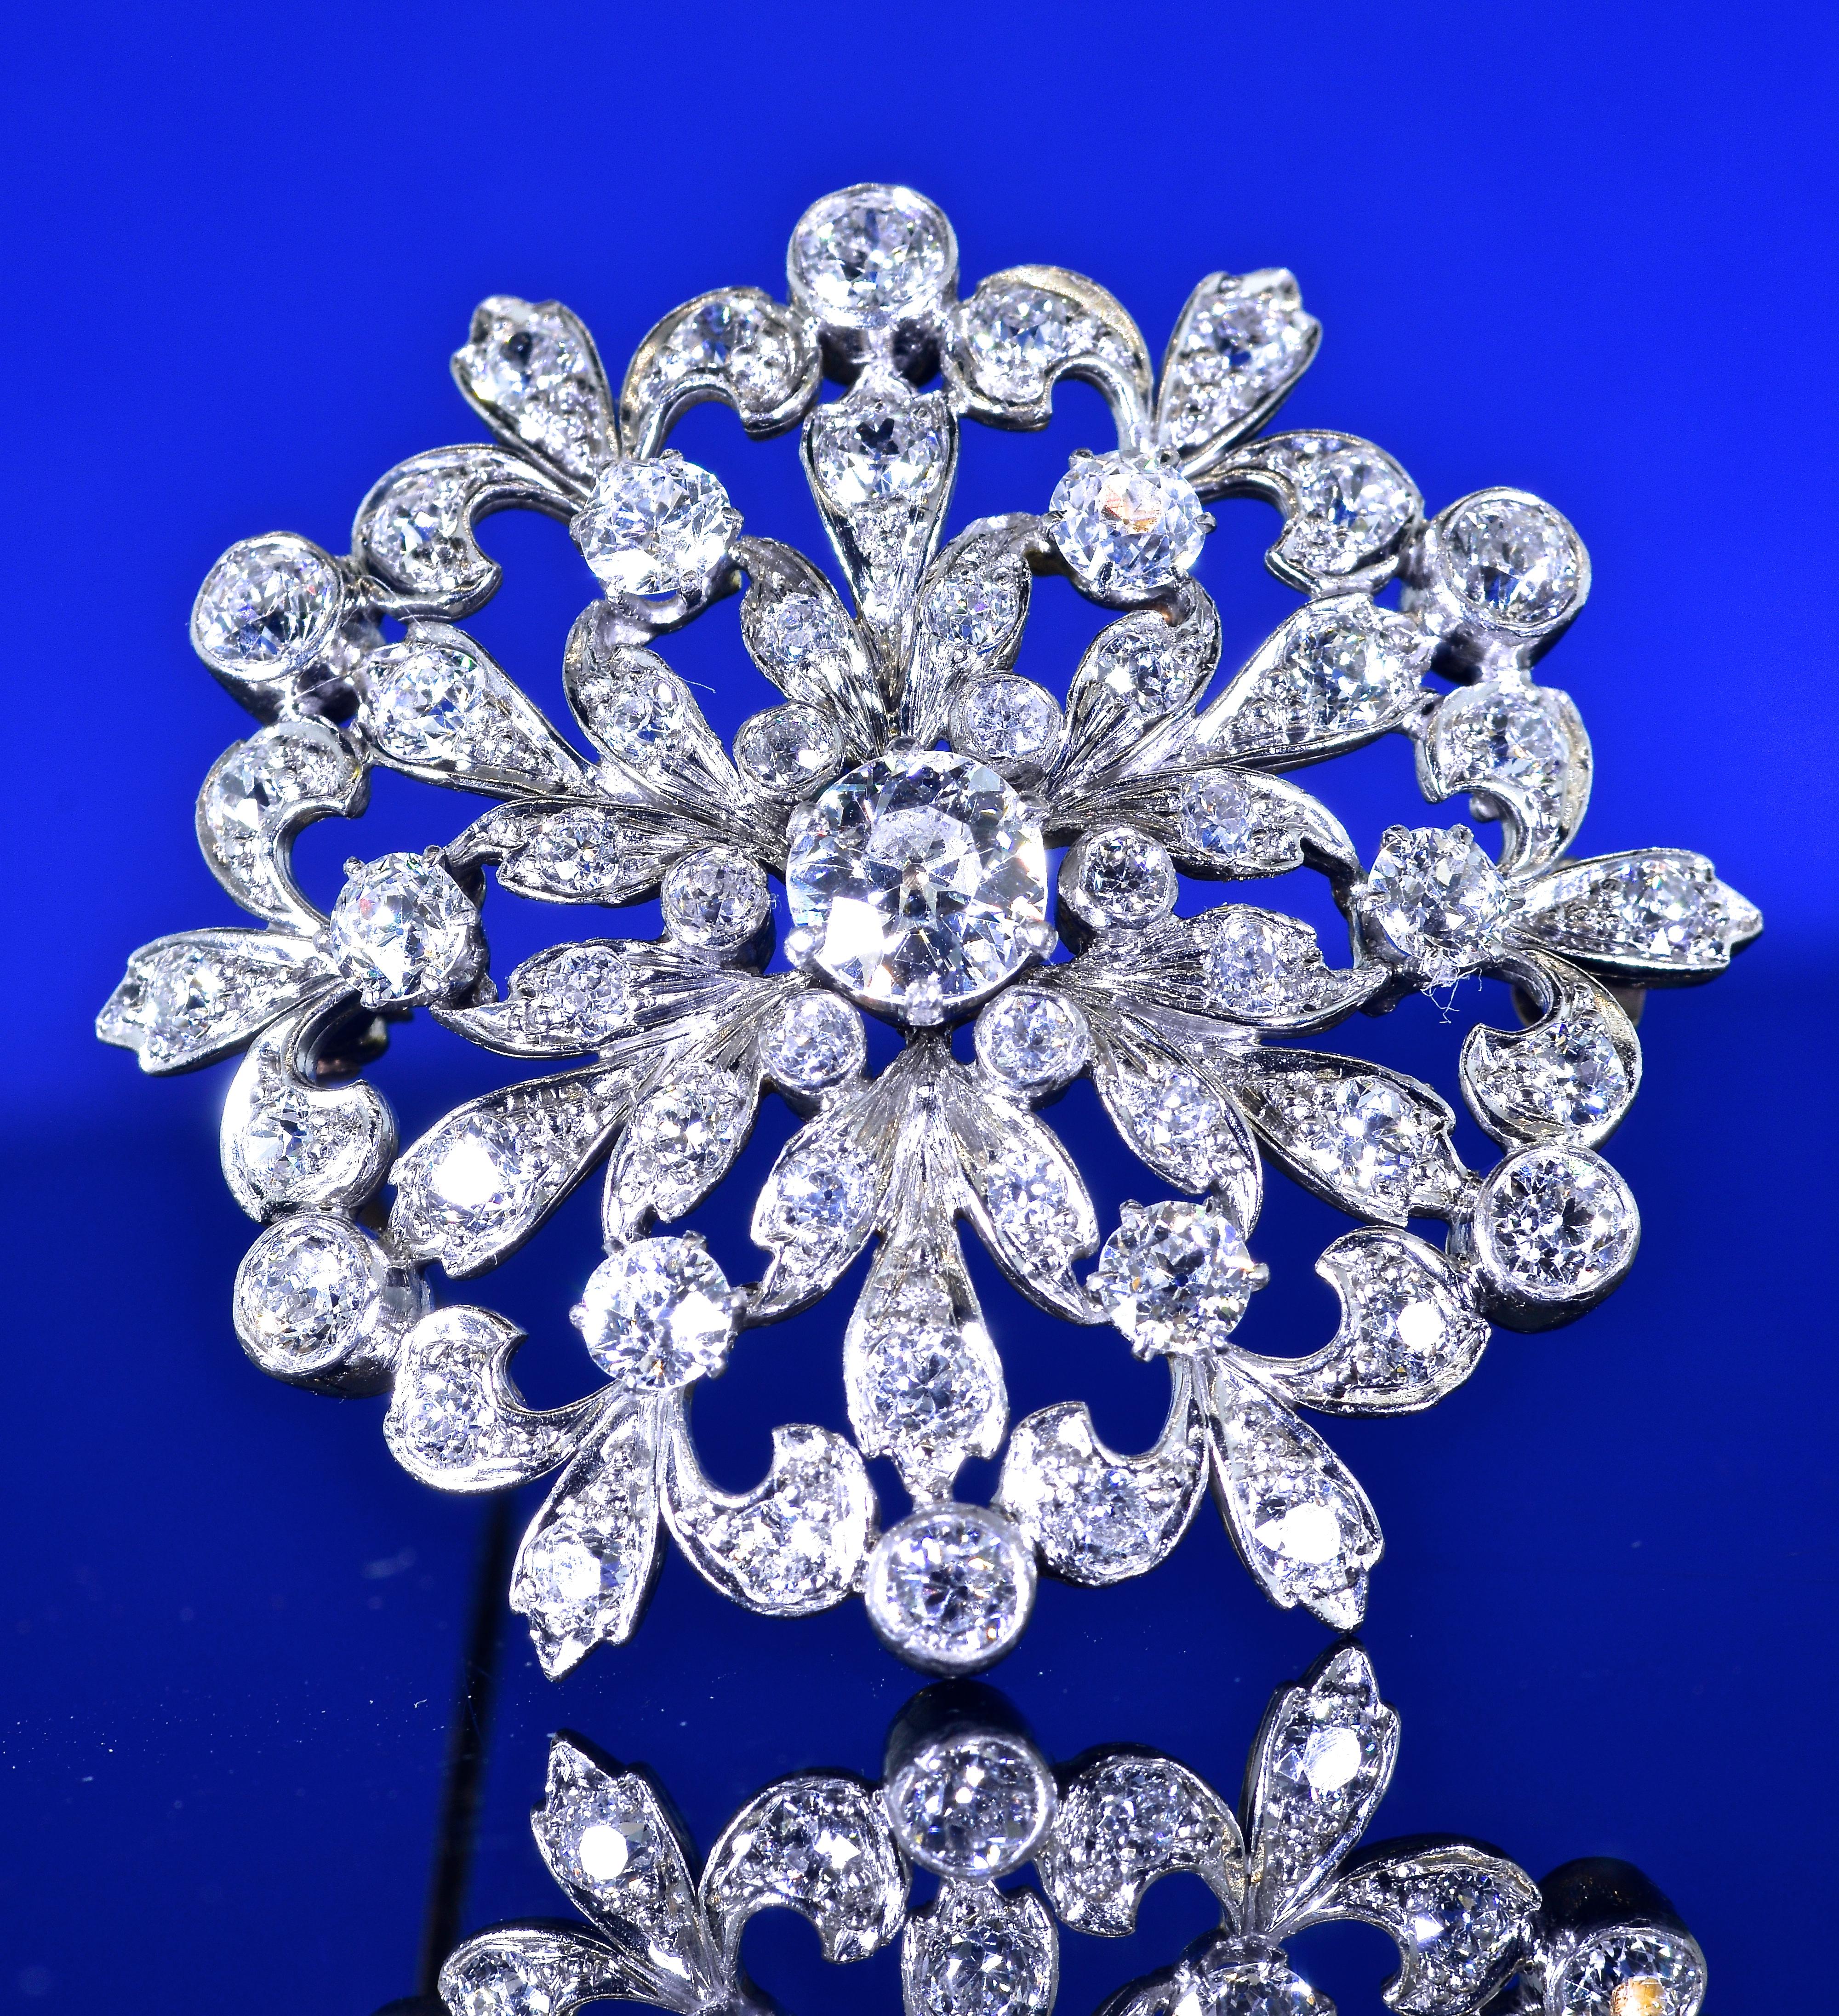 Antique Edwardian diamond pin/pendant possessing very fine diamonds.  This piece is platinum on gold which is very typical of pieces from this time period.  There are 55 well matched European cut diamonds estimated to weigh 3.33 cts. The diamonds